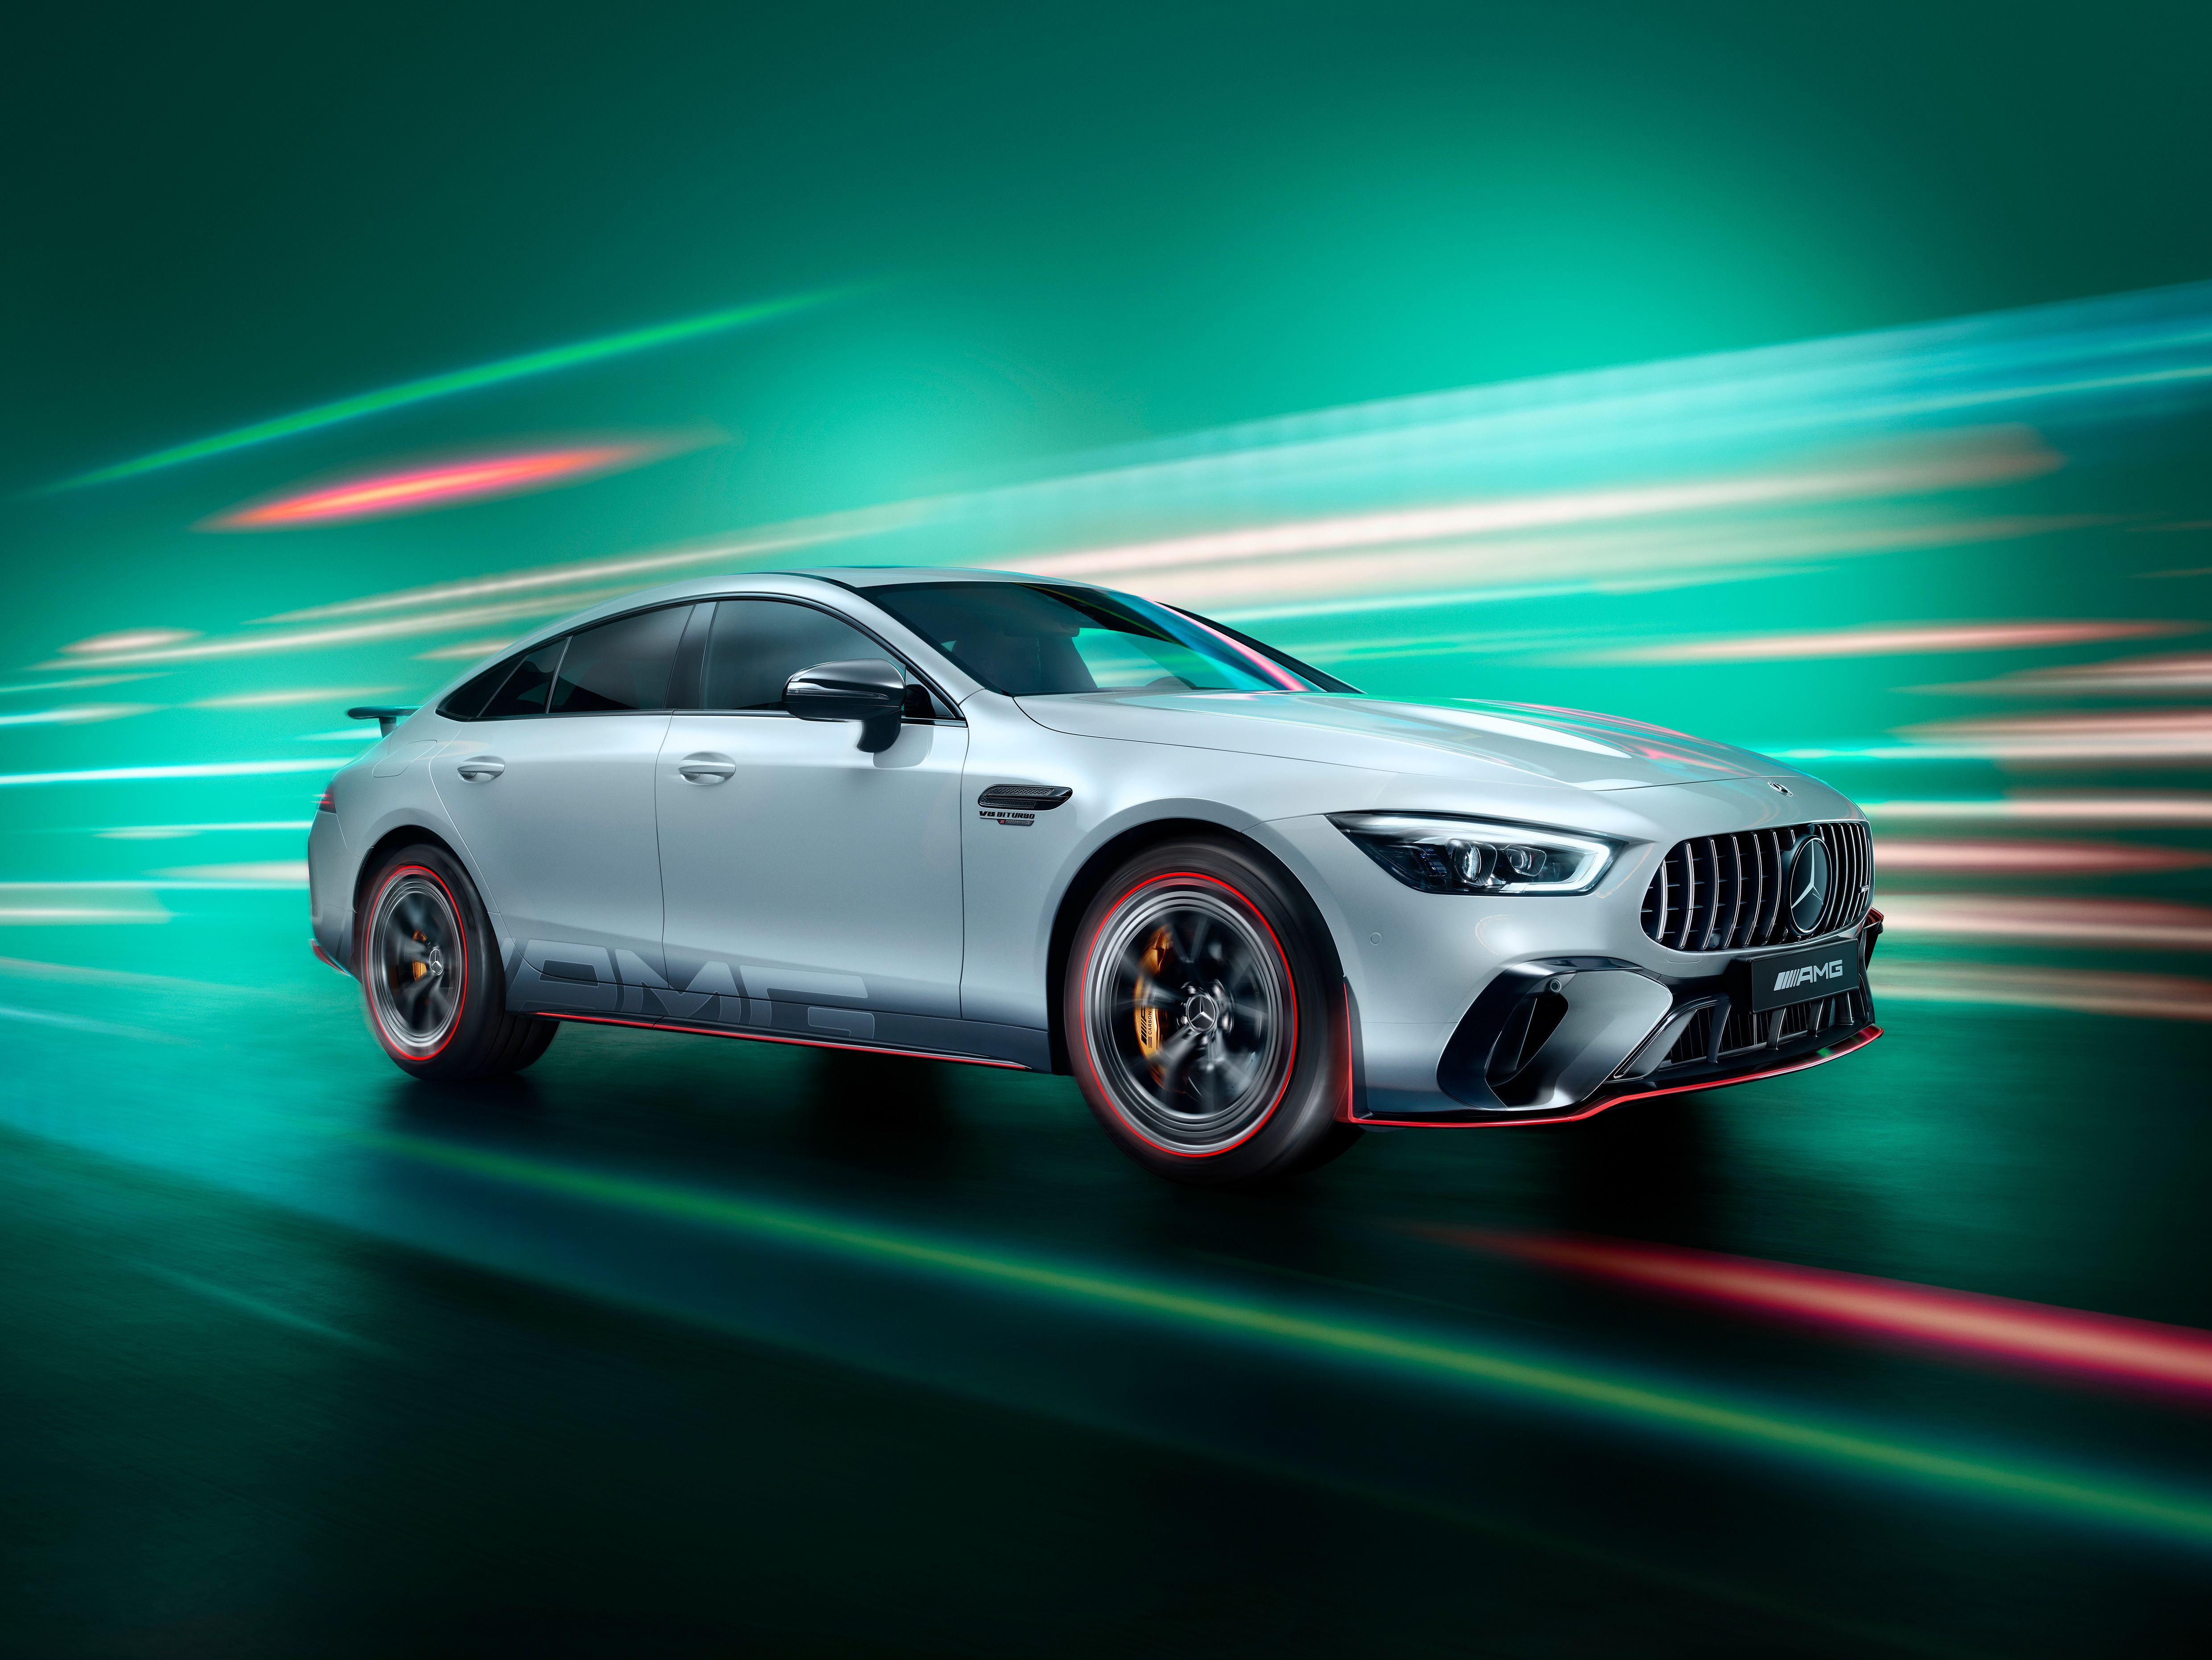 2022 The Mercedes-AMG GT 63 S E Performance F1 Edition Represents $25,000 Worth of Appearance Upgrades